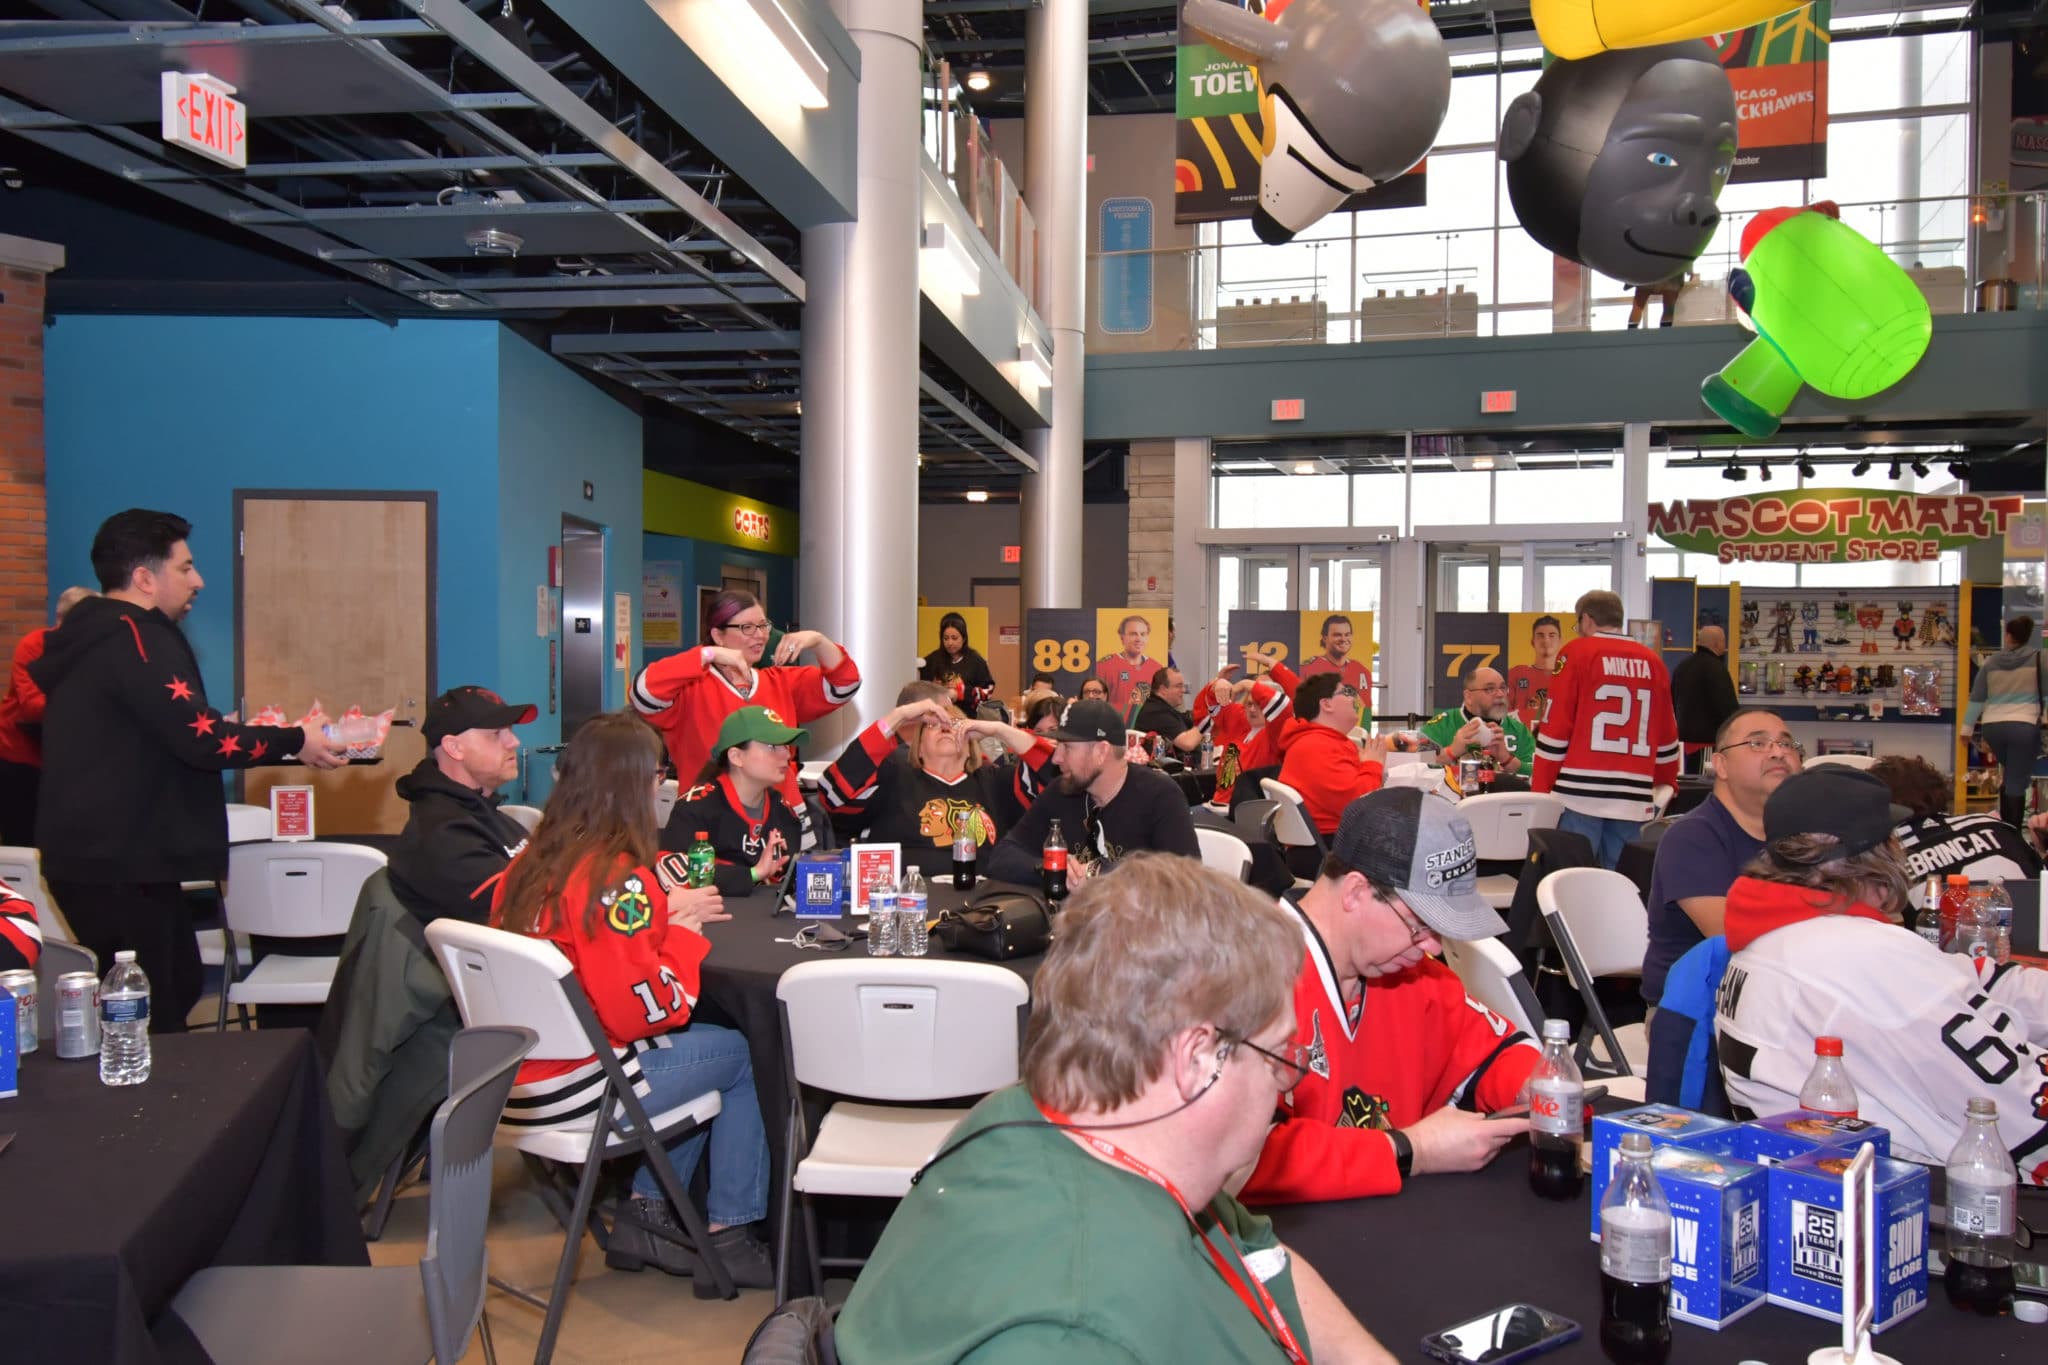 March 19 BHAWKS WATCH PARTY 76